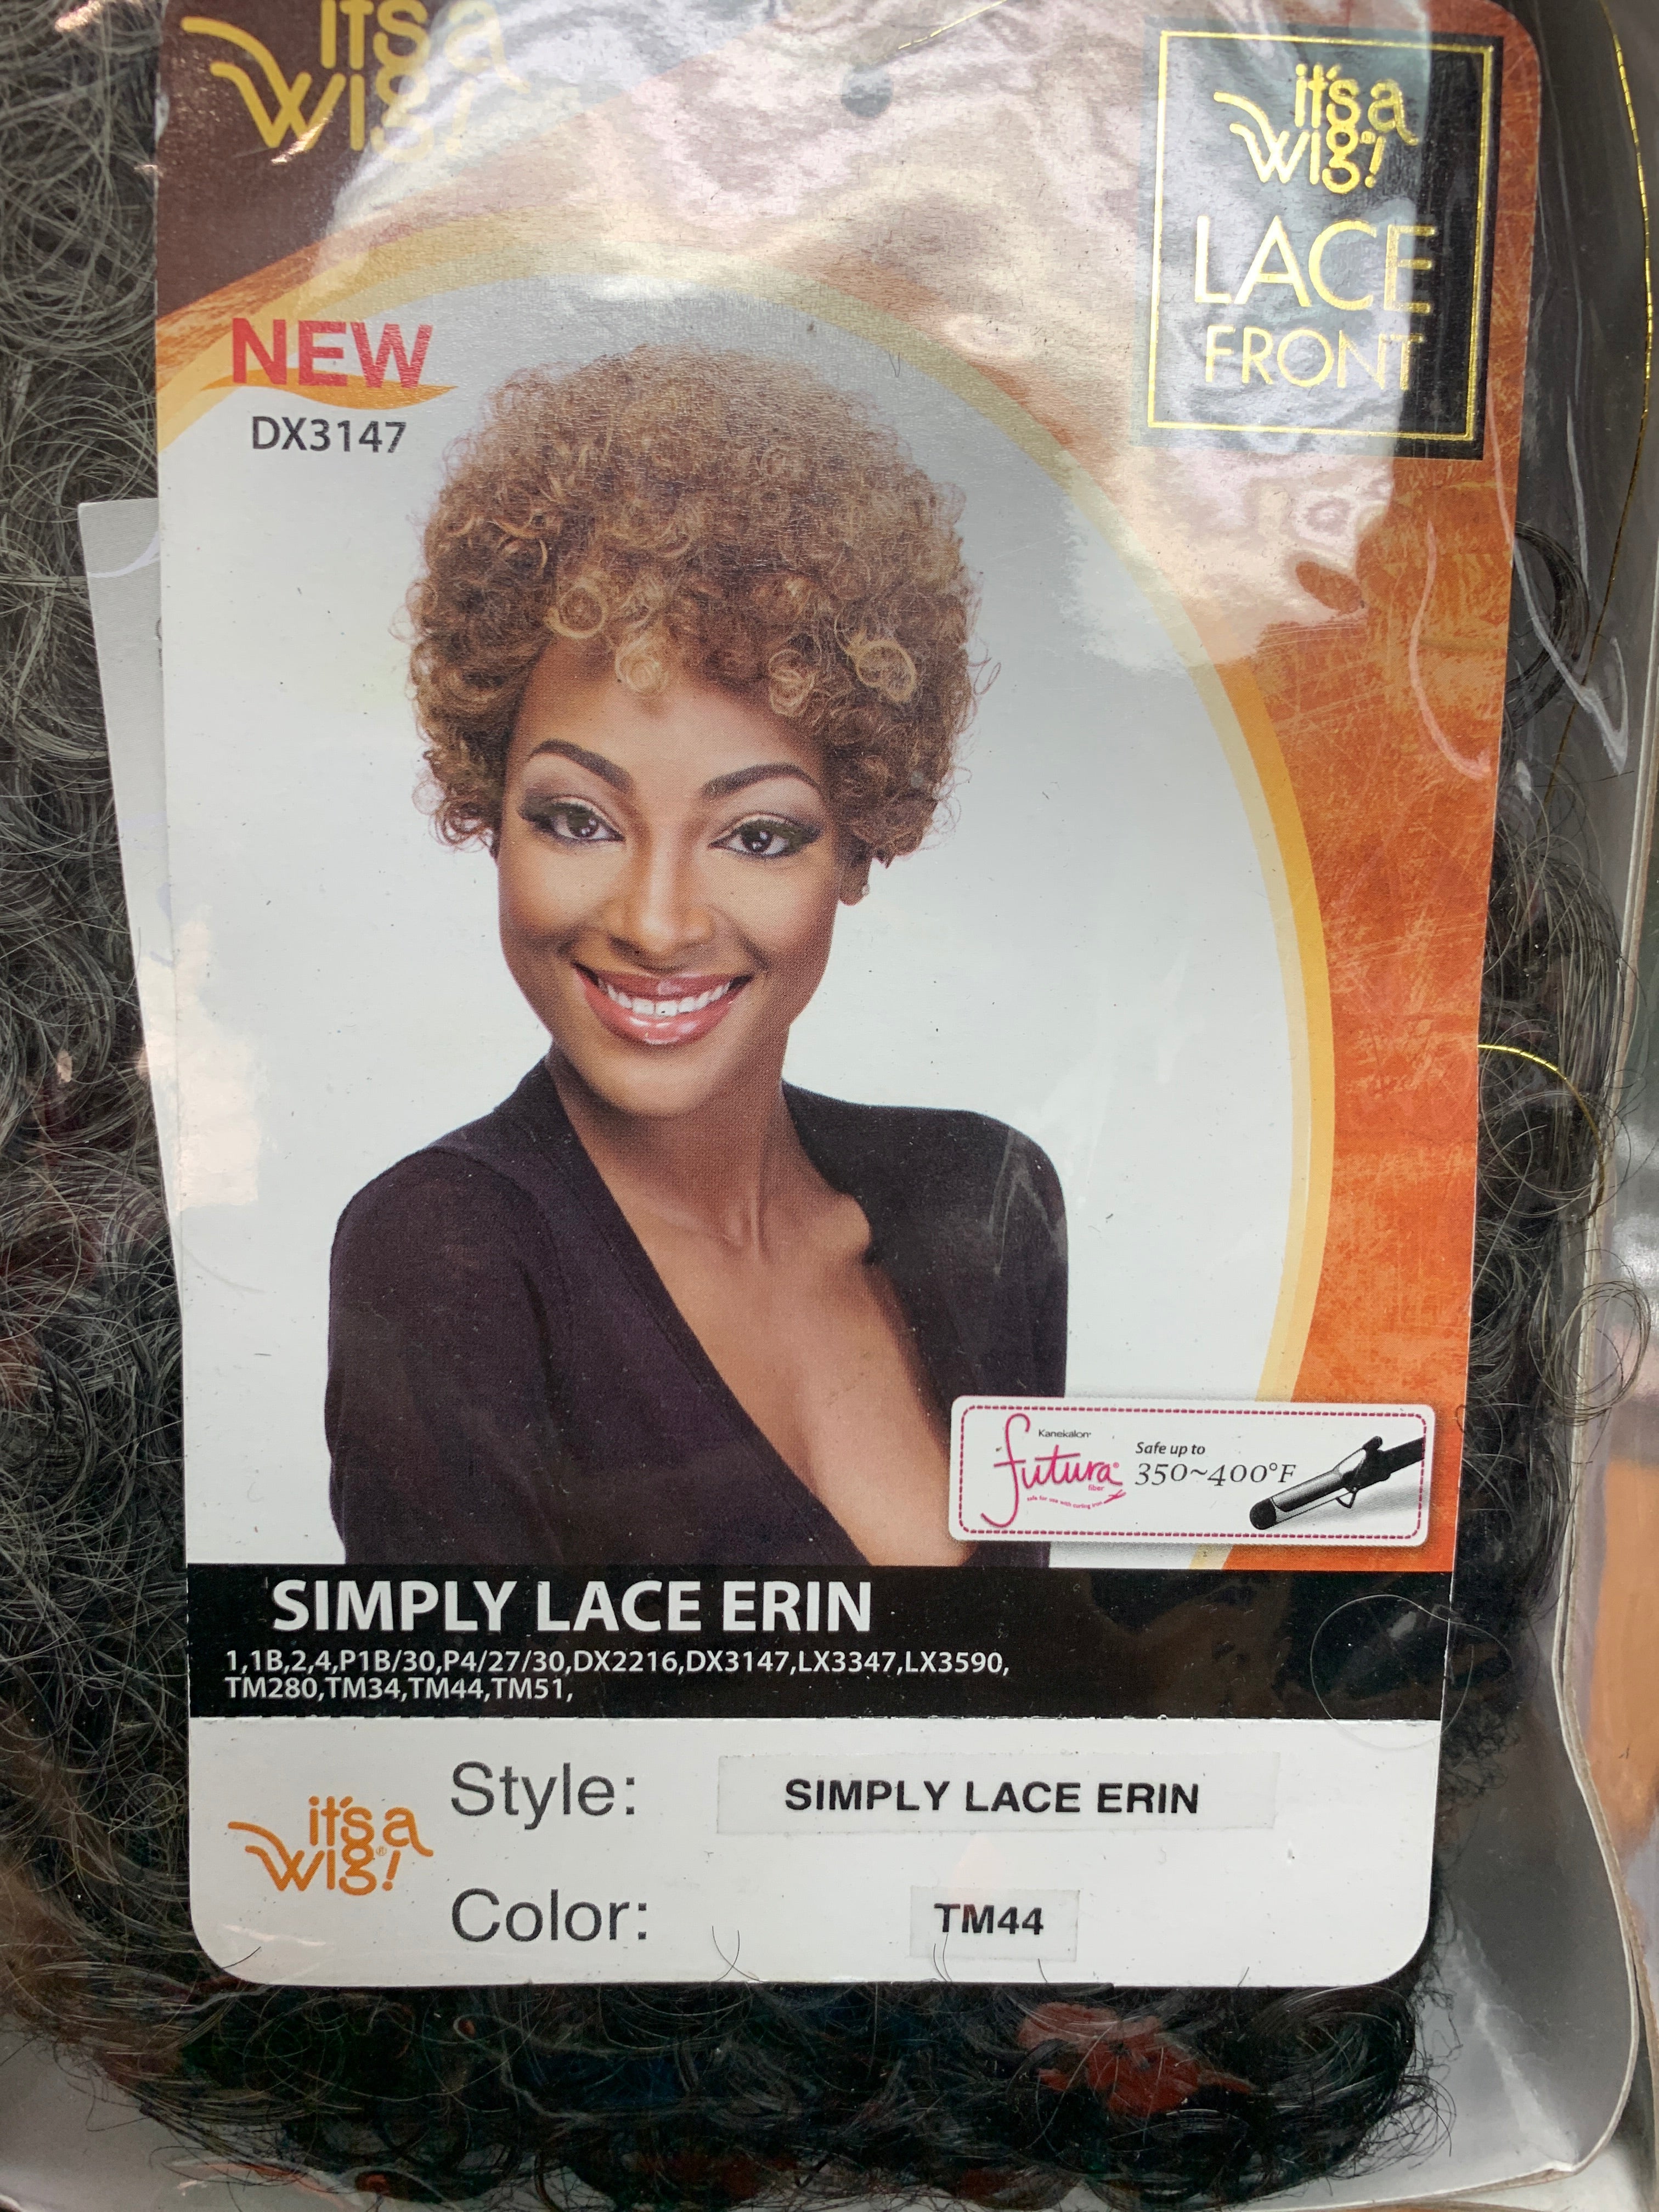 It’s a wig simple lace erin